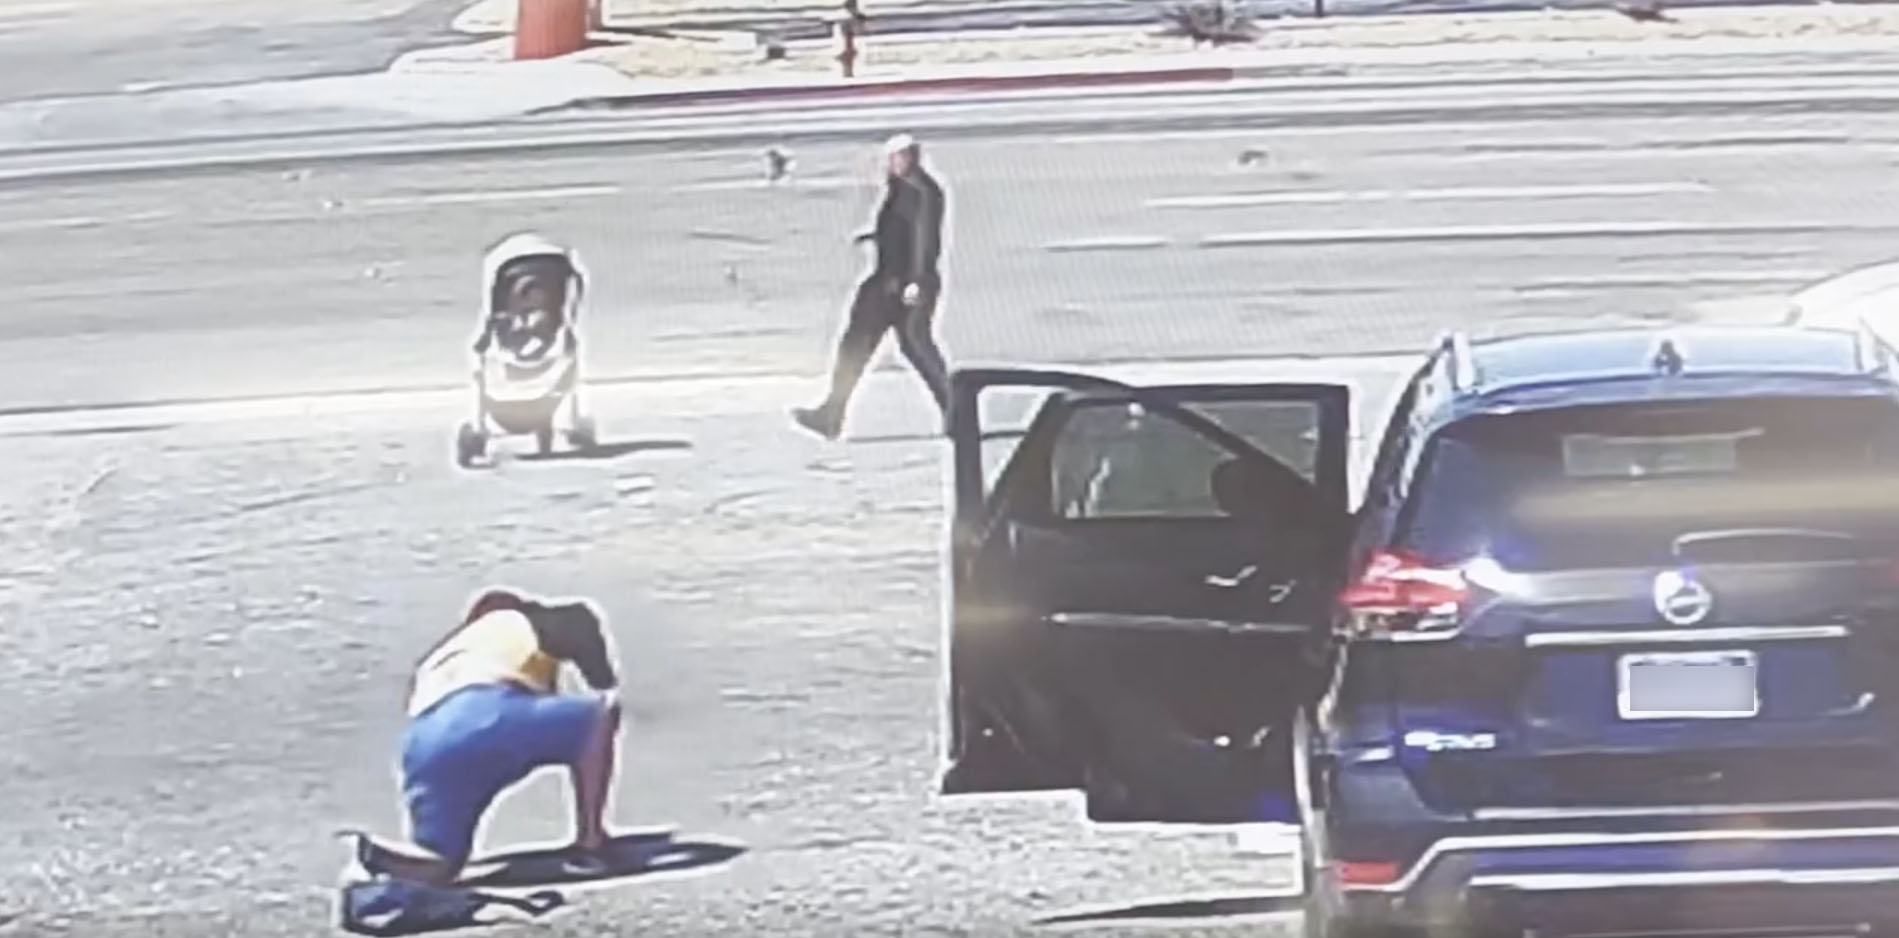 PHOTO: Security video shows a good Samaritan jump into action as the stroller was rolling toward heavy traffic in Hesperia, Calif.